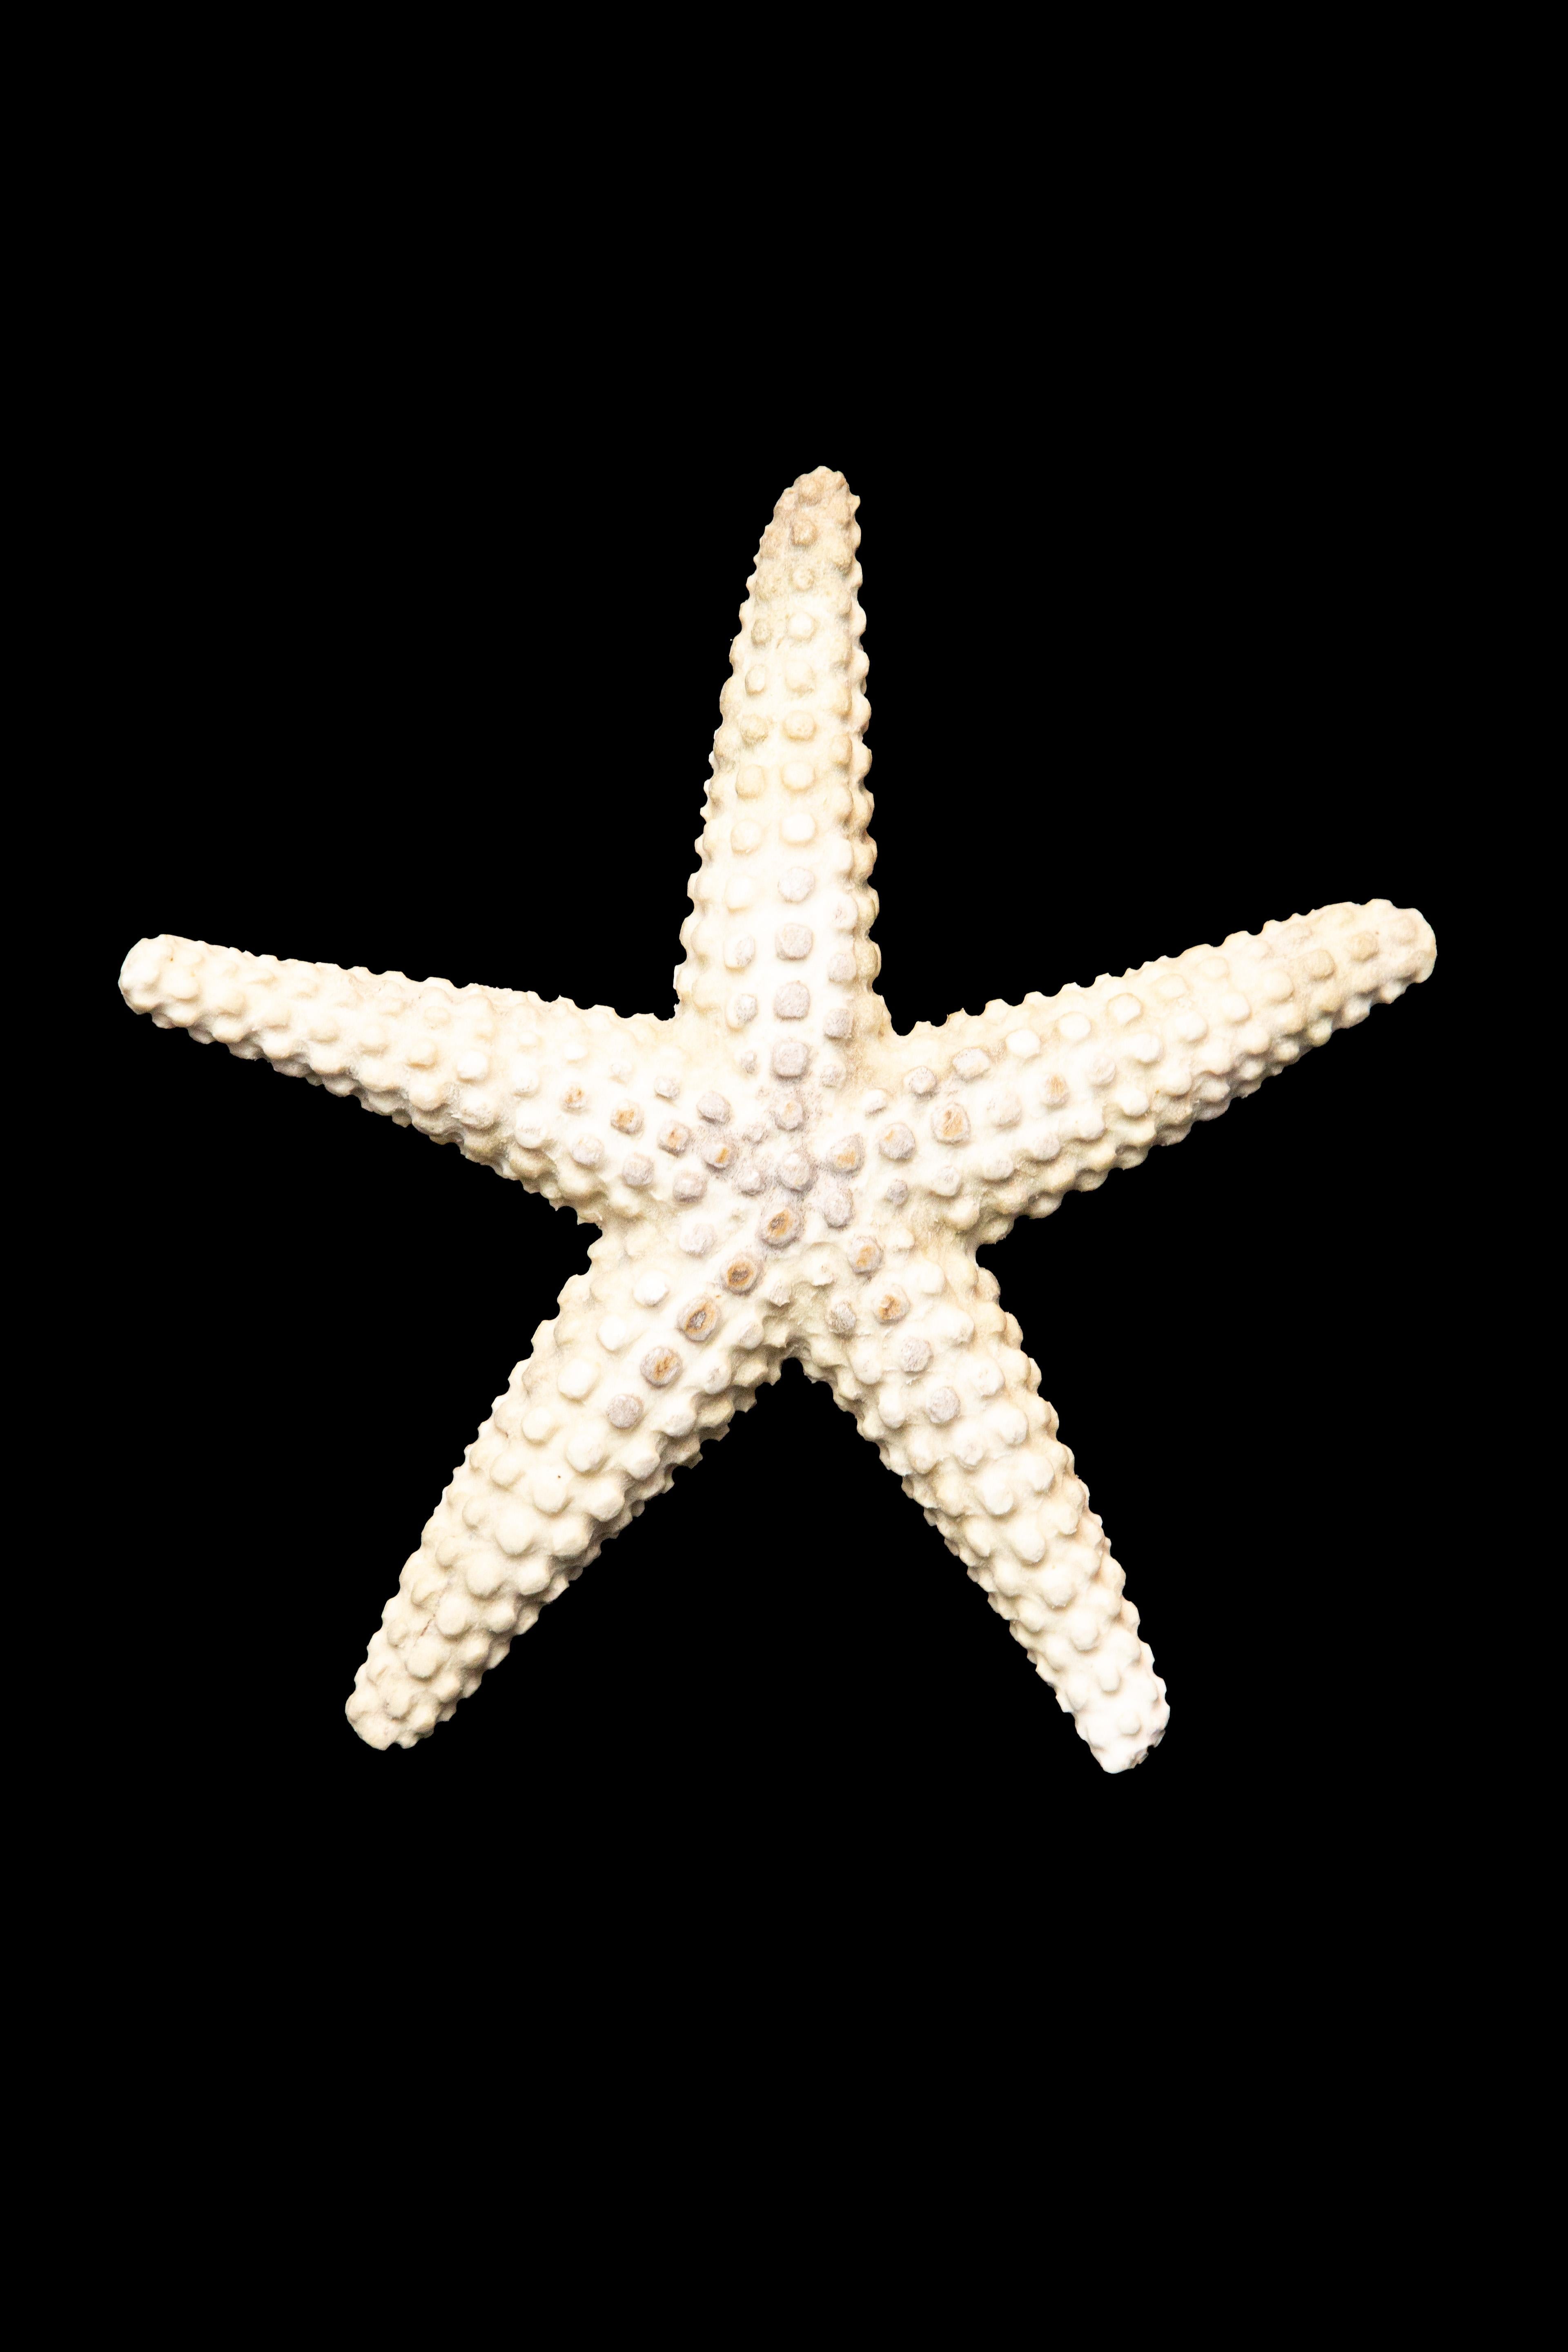 Carved moose antler starfish

The moose antler was sourced in North America and carved in Indonesia. Quality of ivory, but with sustainability, as the moose naturally shed their antlers.

Measures approximately: 8